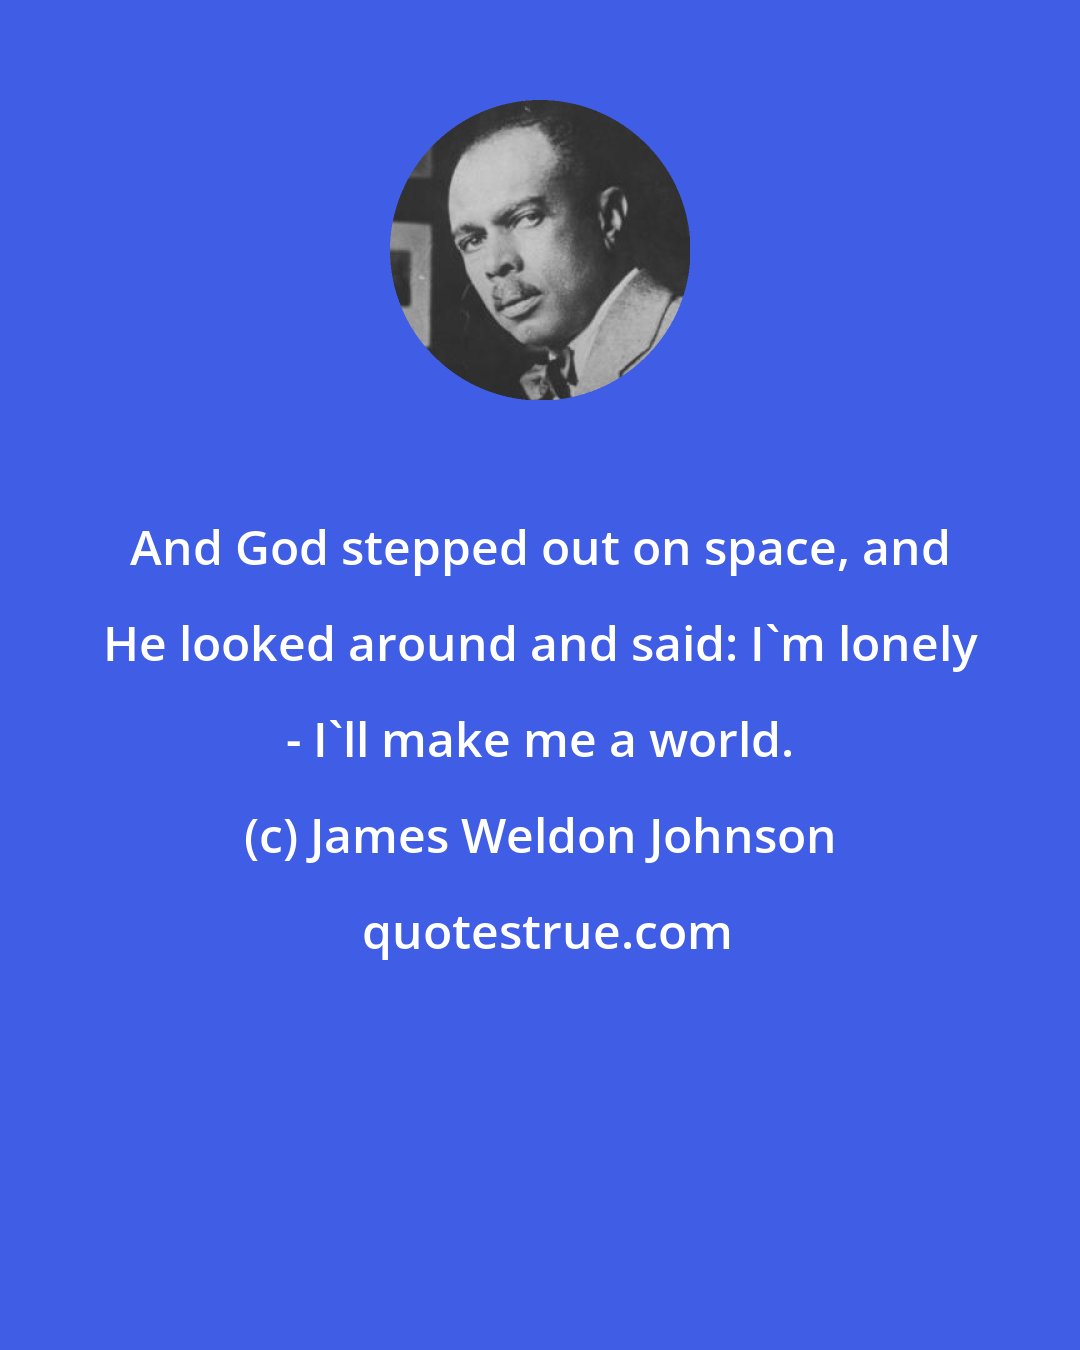 James Weldon Johnson: And God stepped out on space, and He looked around and said: I'm lonely - I'll make me a world.